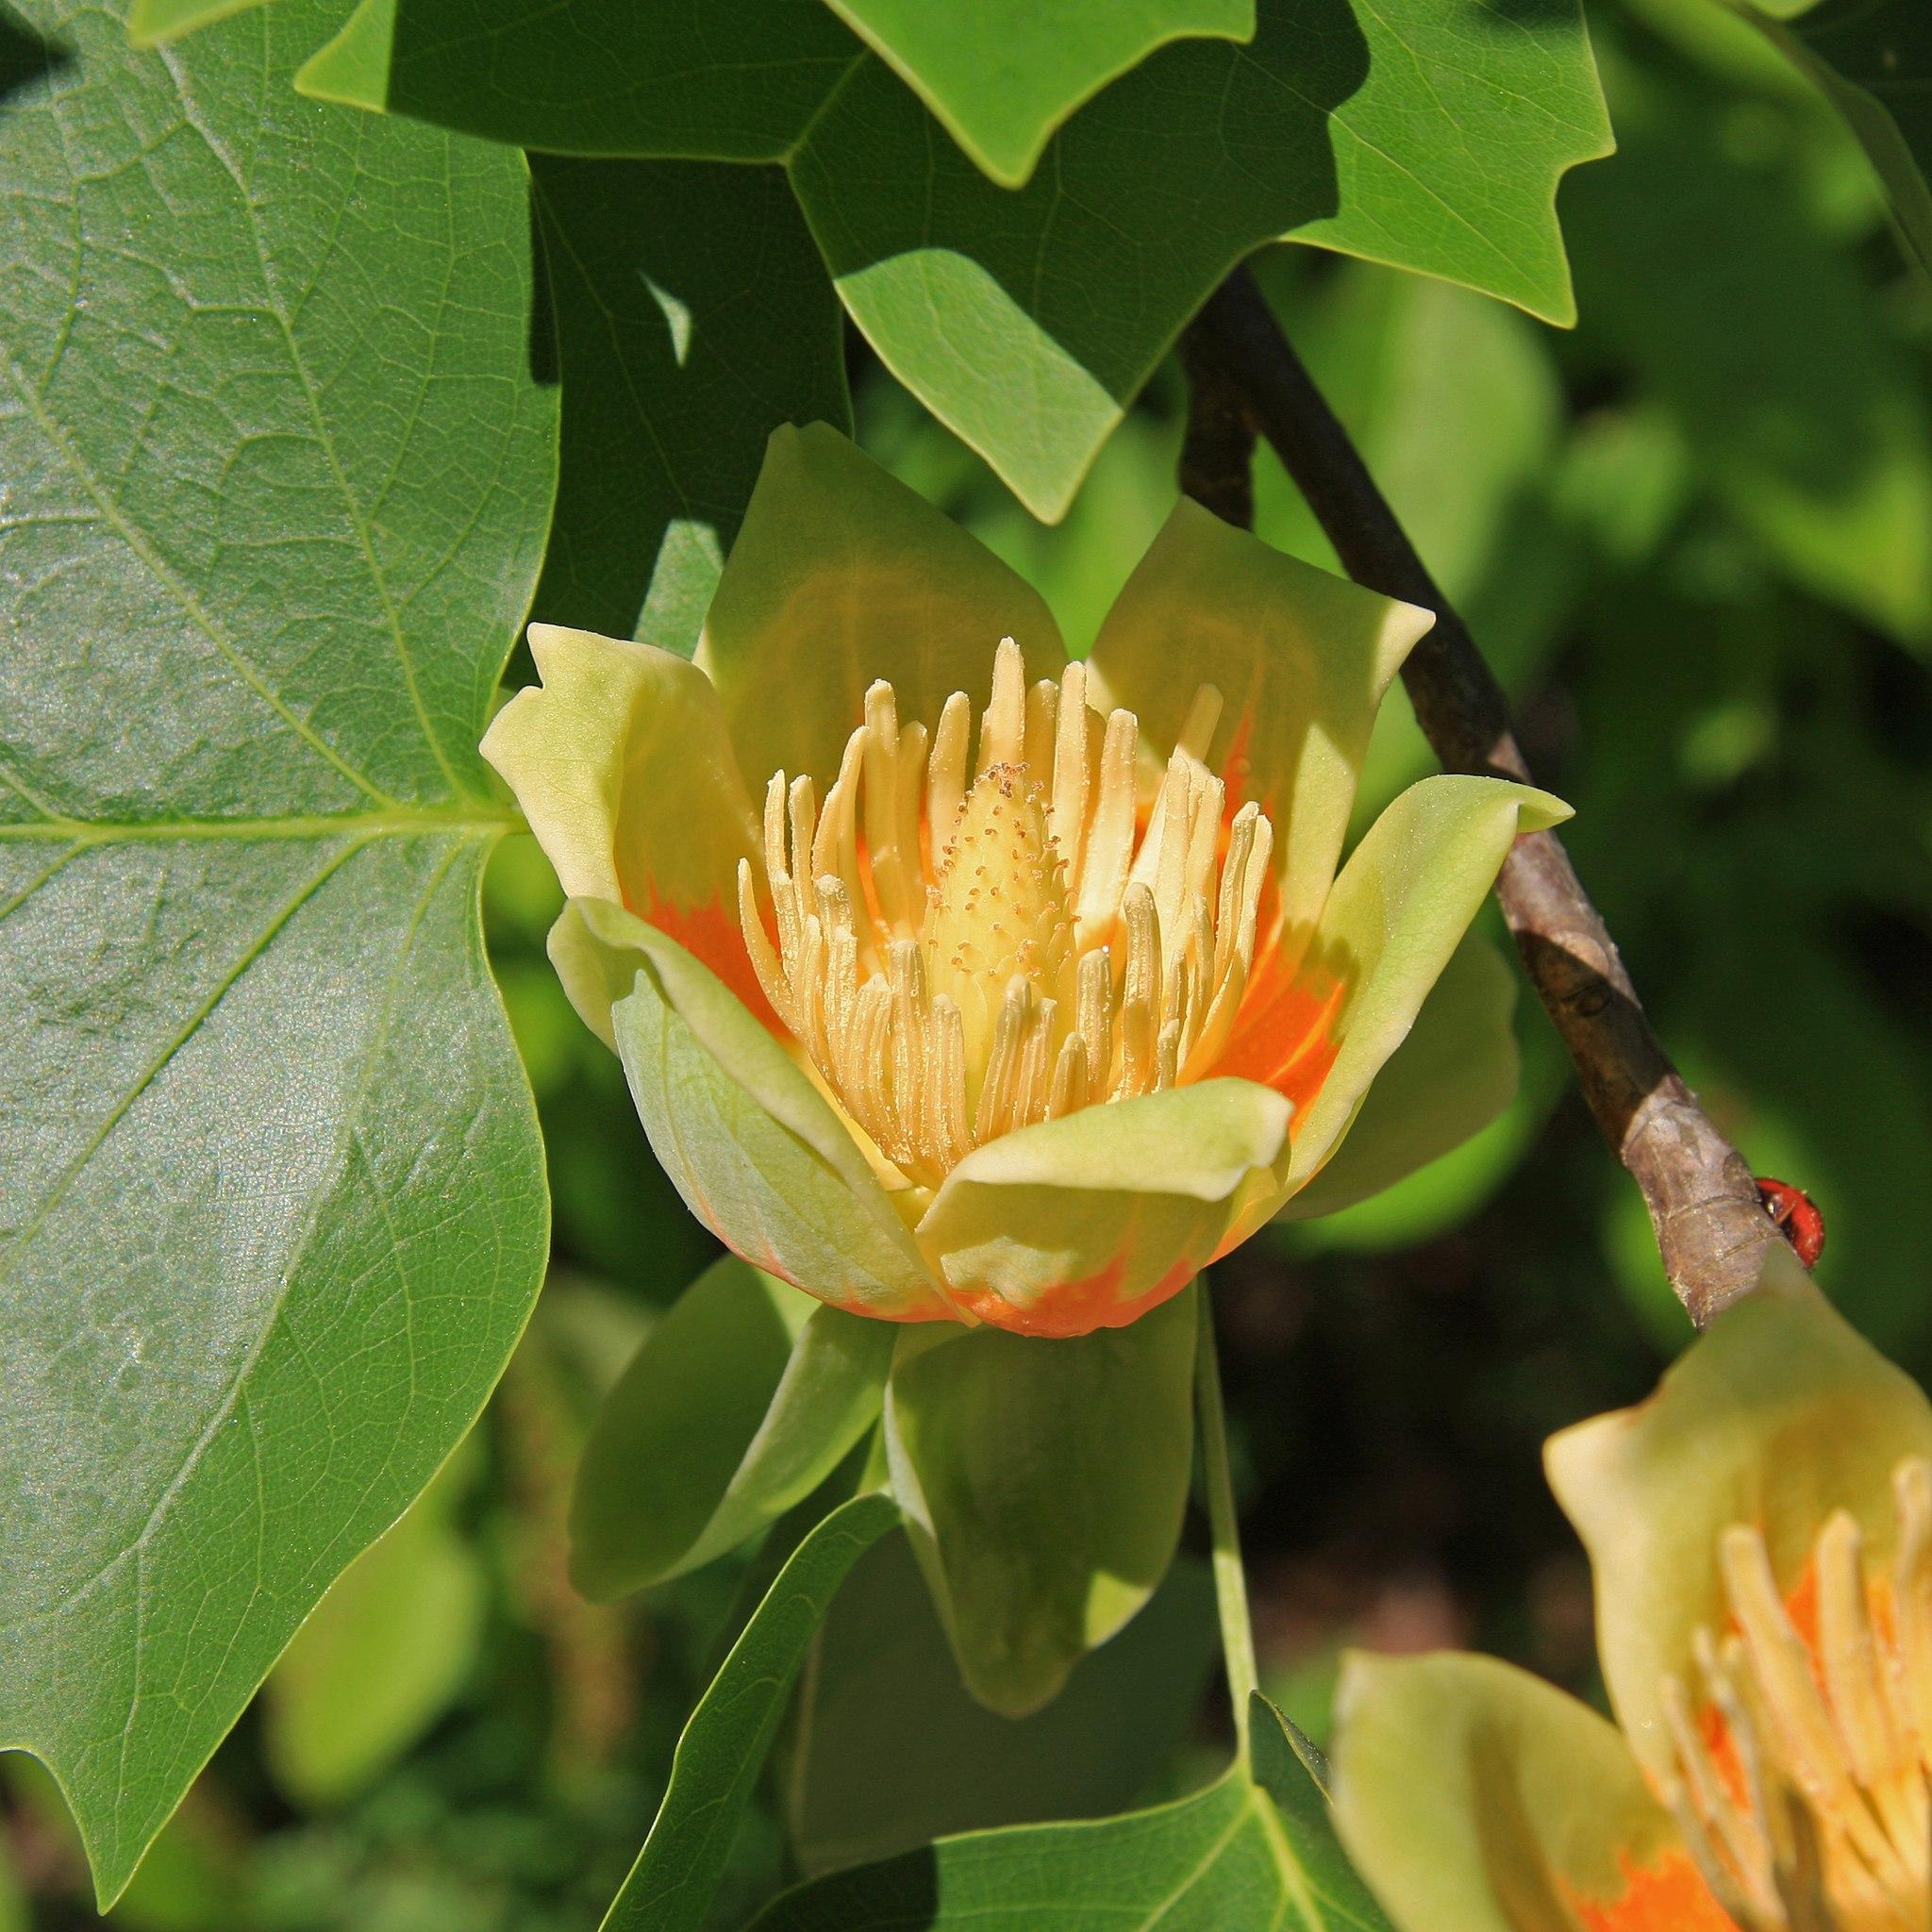 lime-orange flowers with yellow stamens, green leaves and brown branches